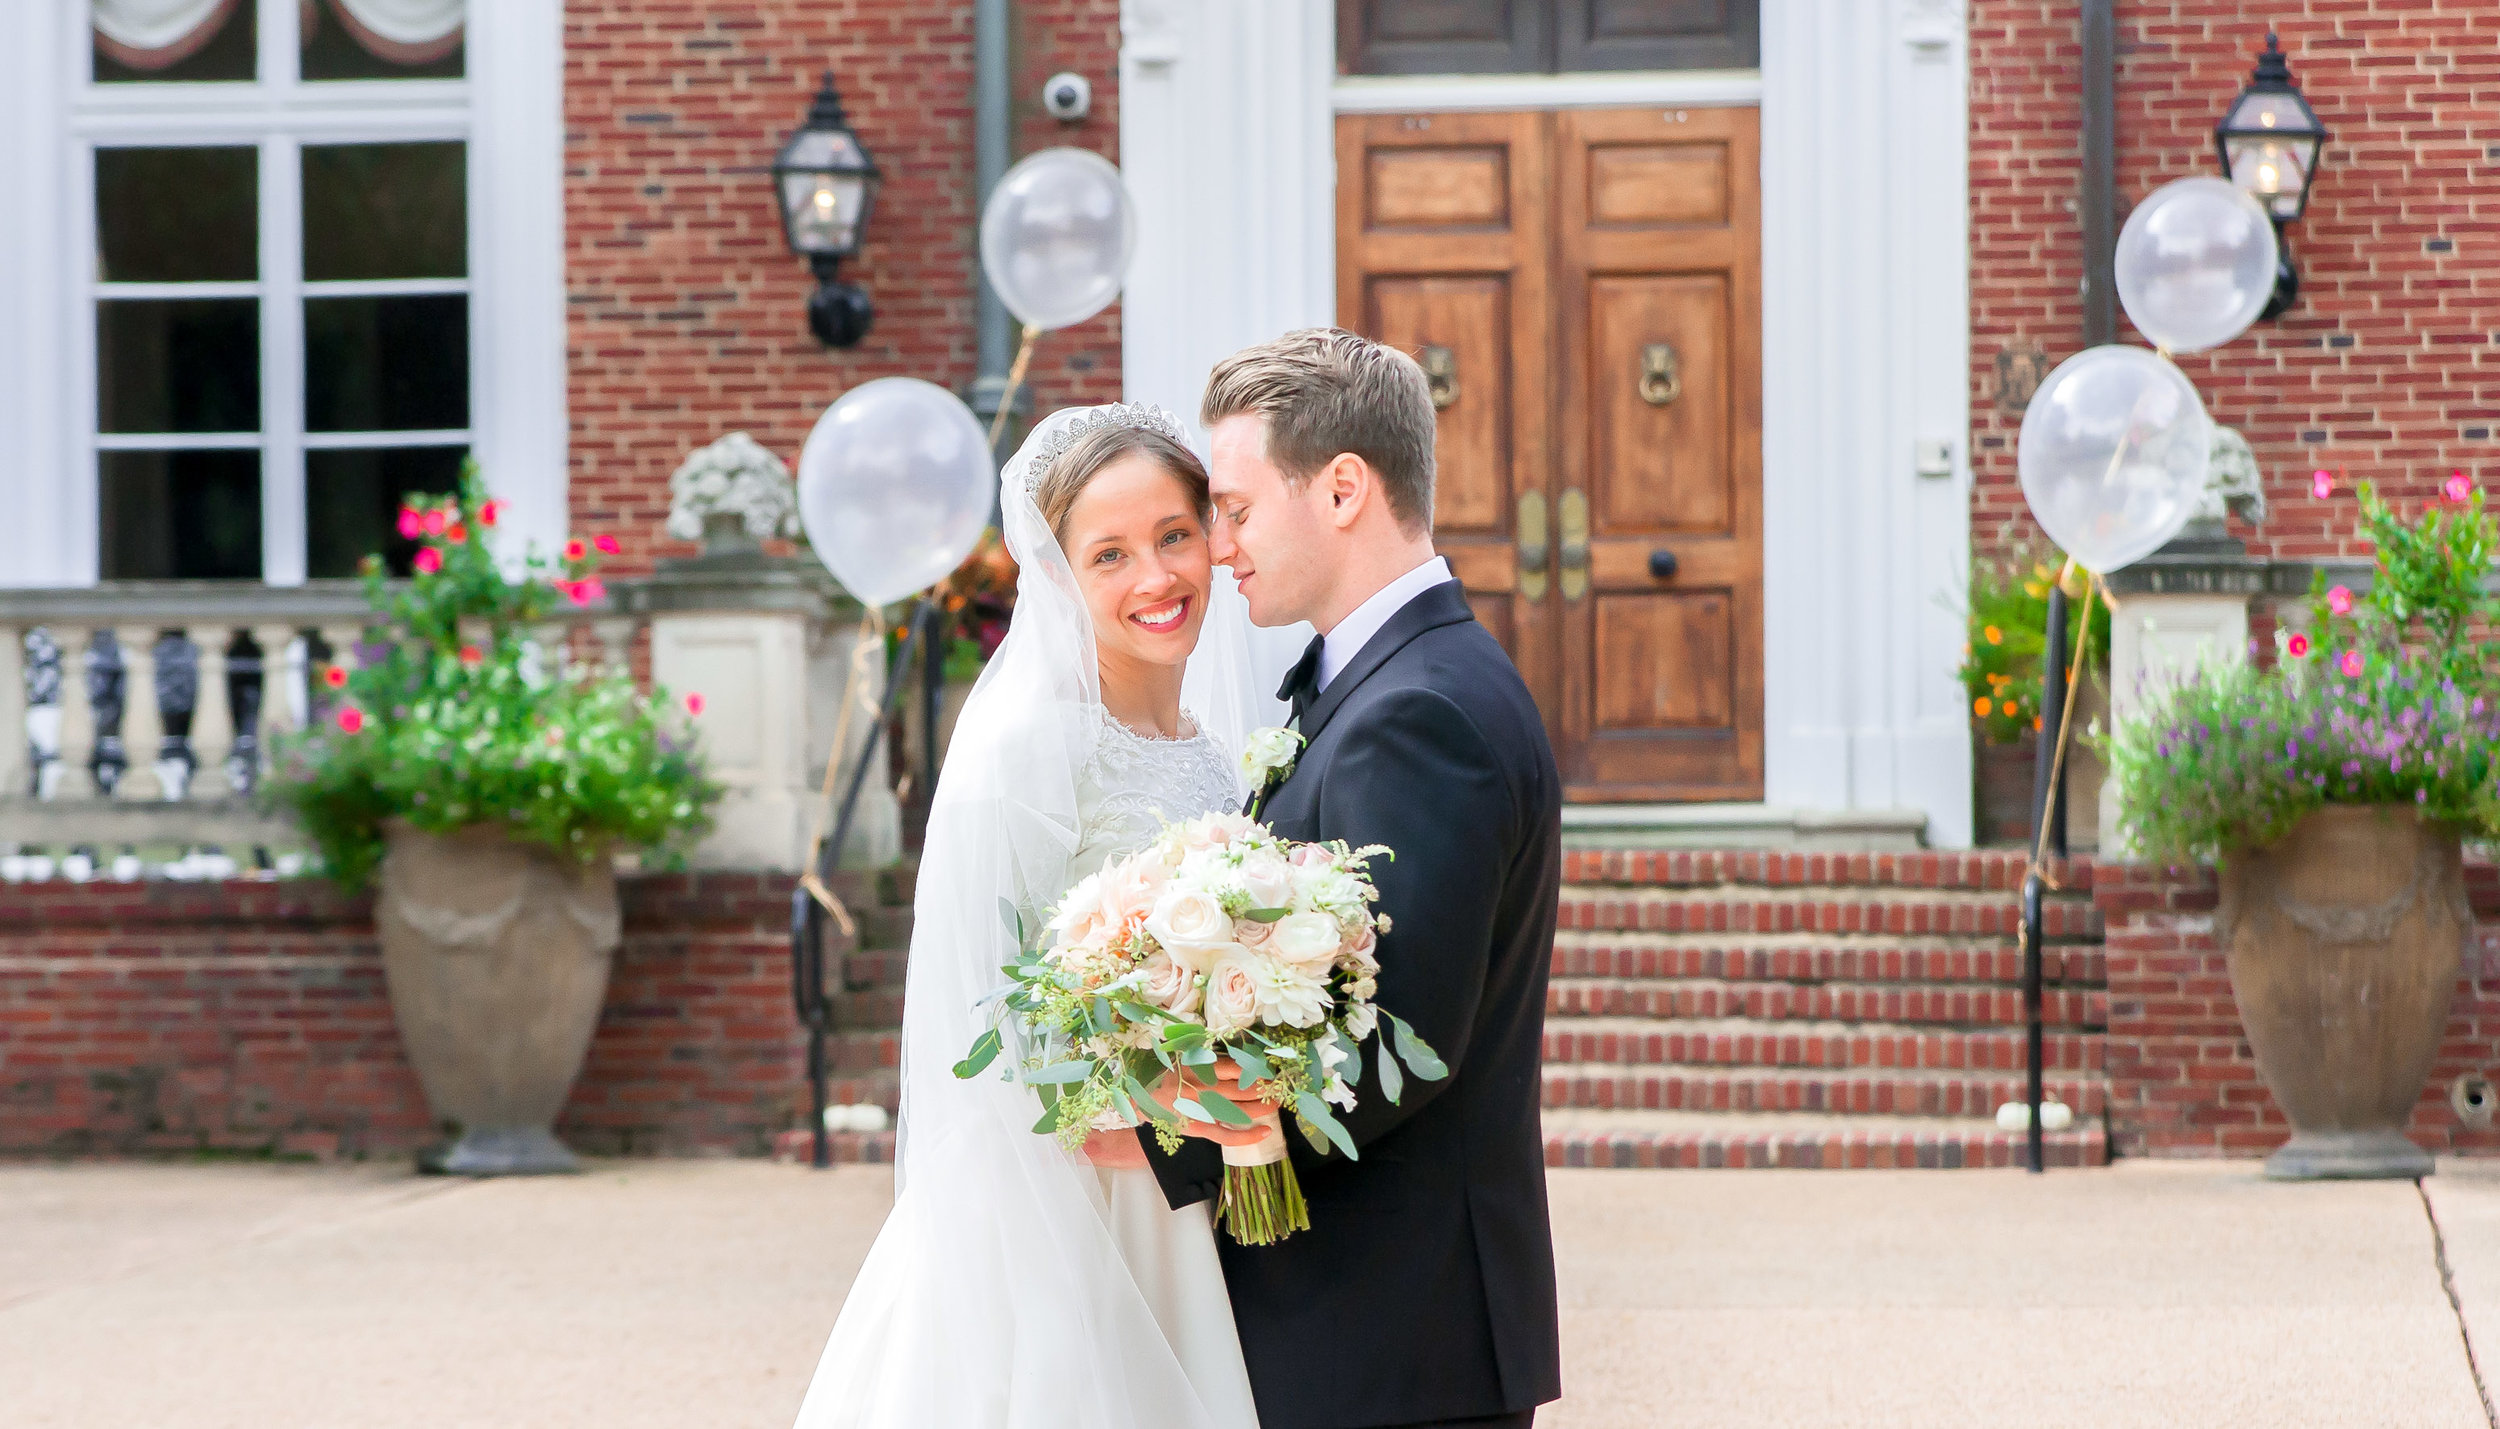 Oxon Hill Manor wedding photos with bride and groom